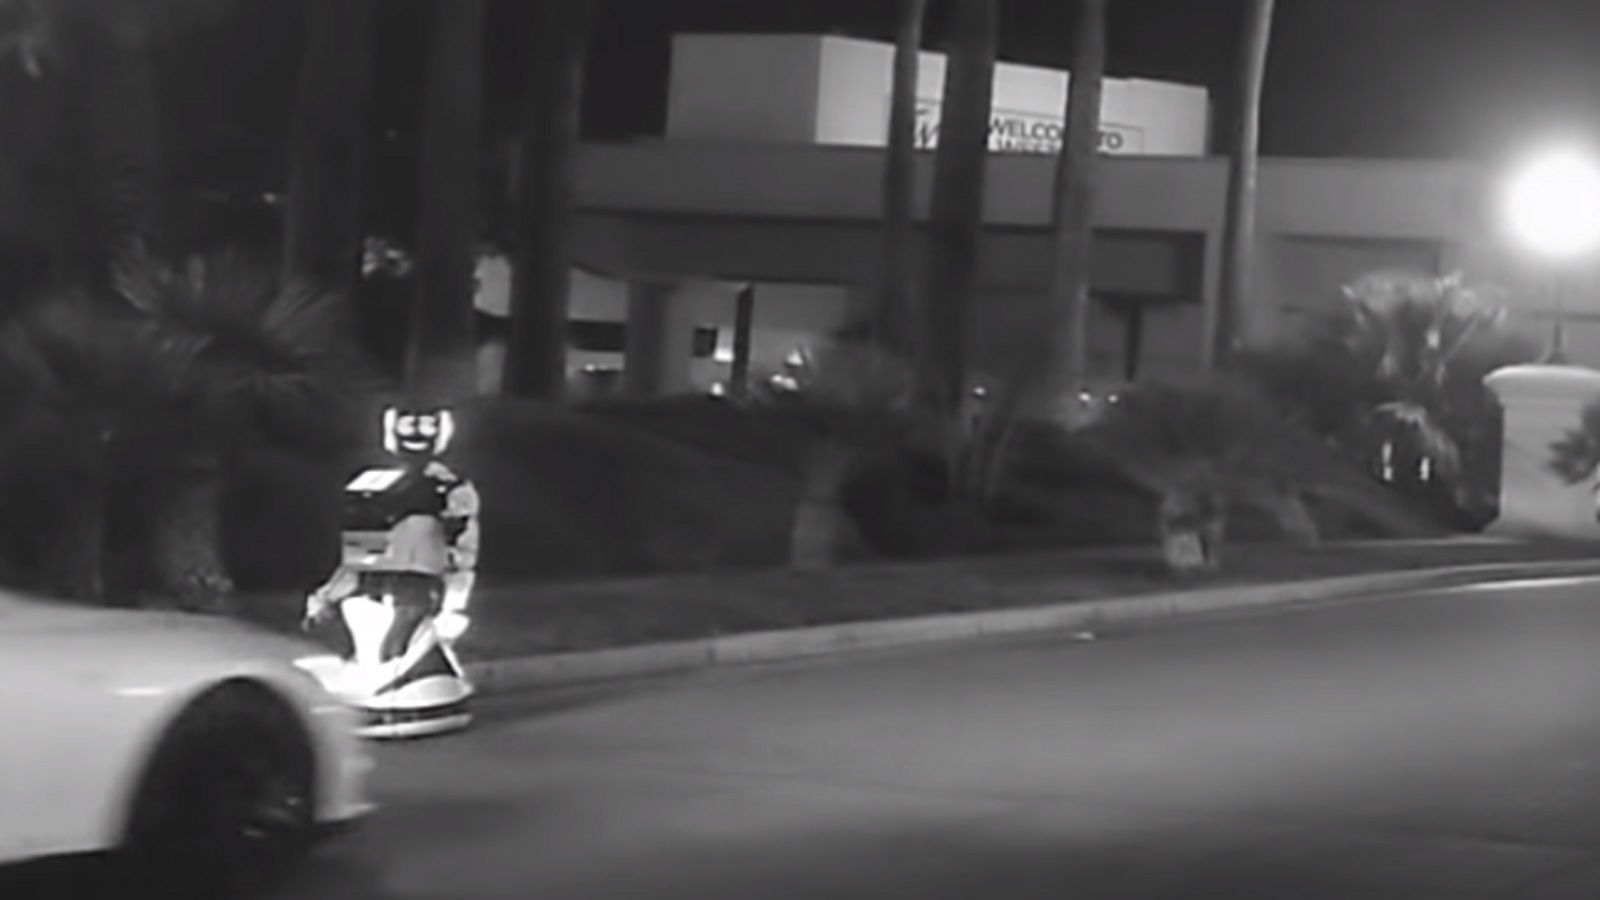 veteran hold lighed Tesla S in autonomous mode 'kills' robot in hit-and-run at Las Vegas CES  show